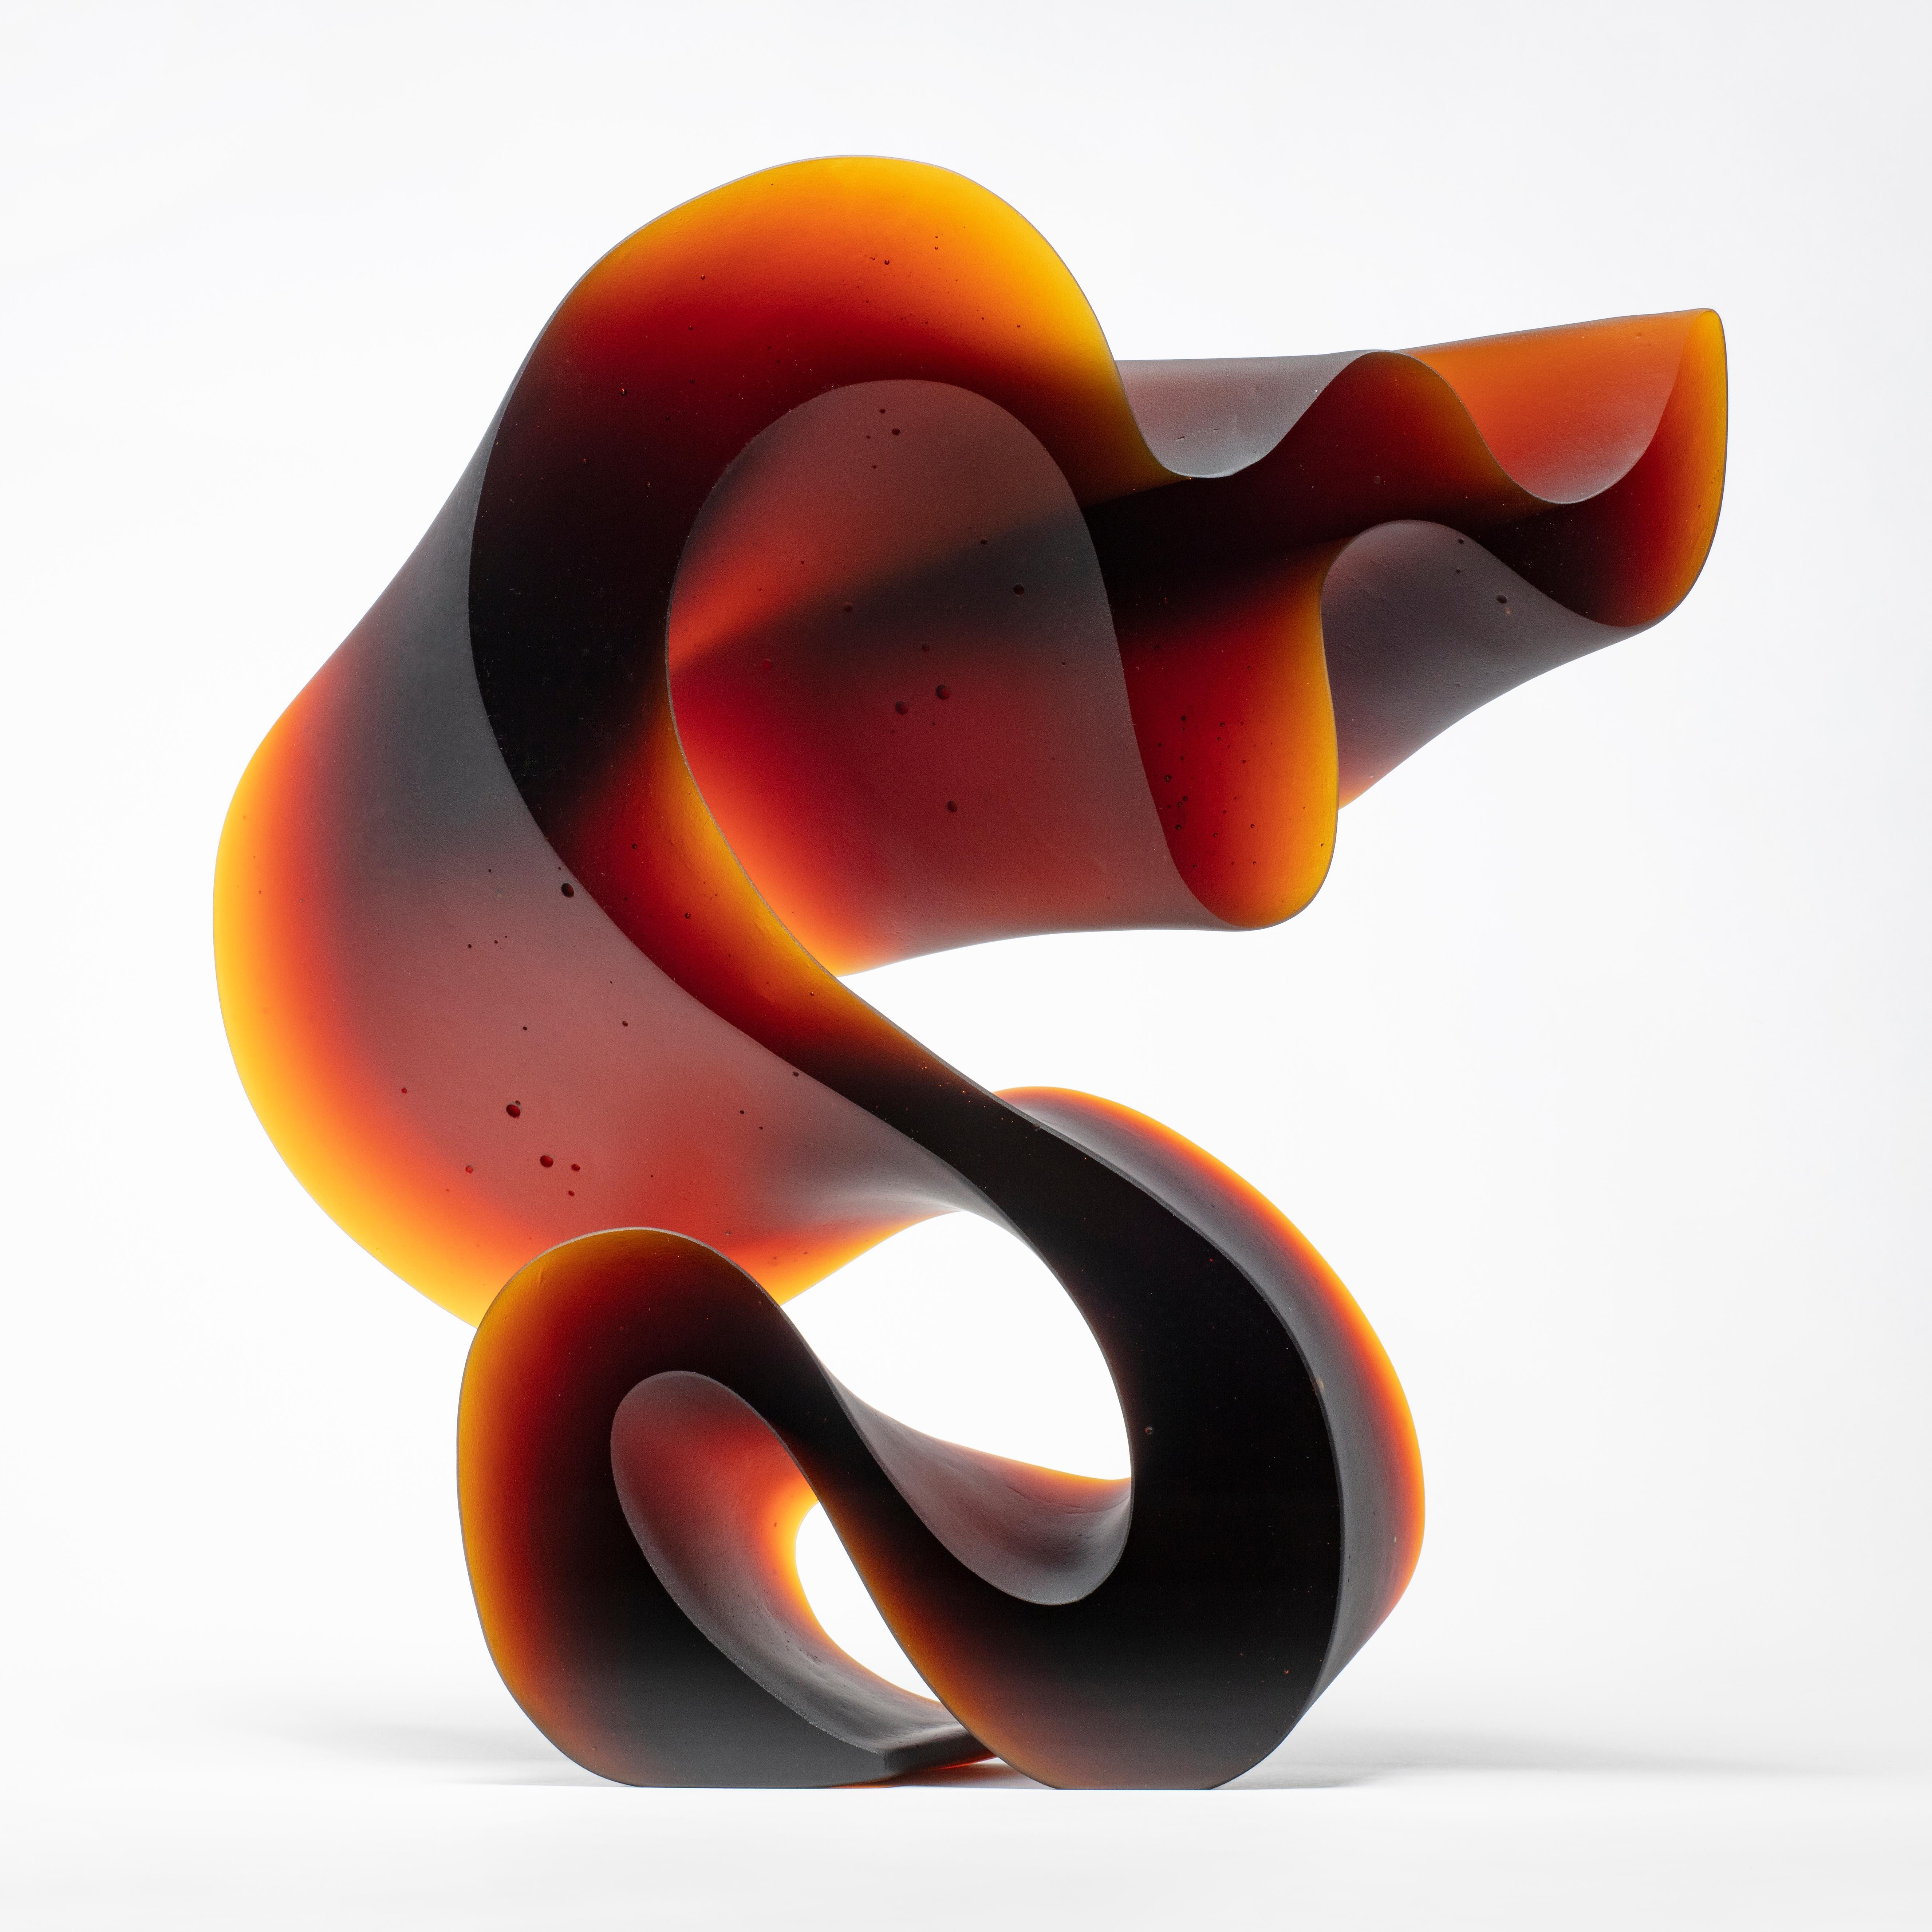 Big red line is a unique cast glass sculpture in amber / red glass, created by the Danish artist Karin Mørch. Dramatic sweeping curves Meander and follow the beautiful lines of this heavy and solid cast piece. Mørch intimately understands her glass